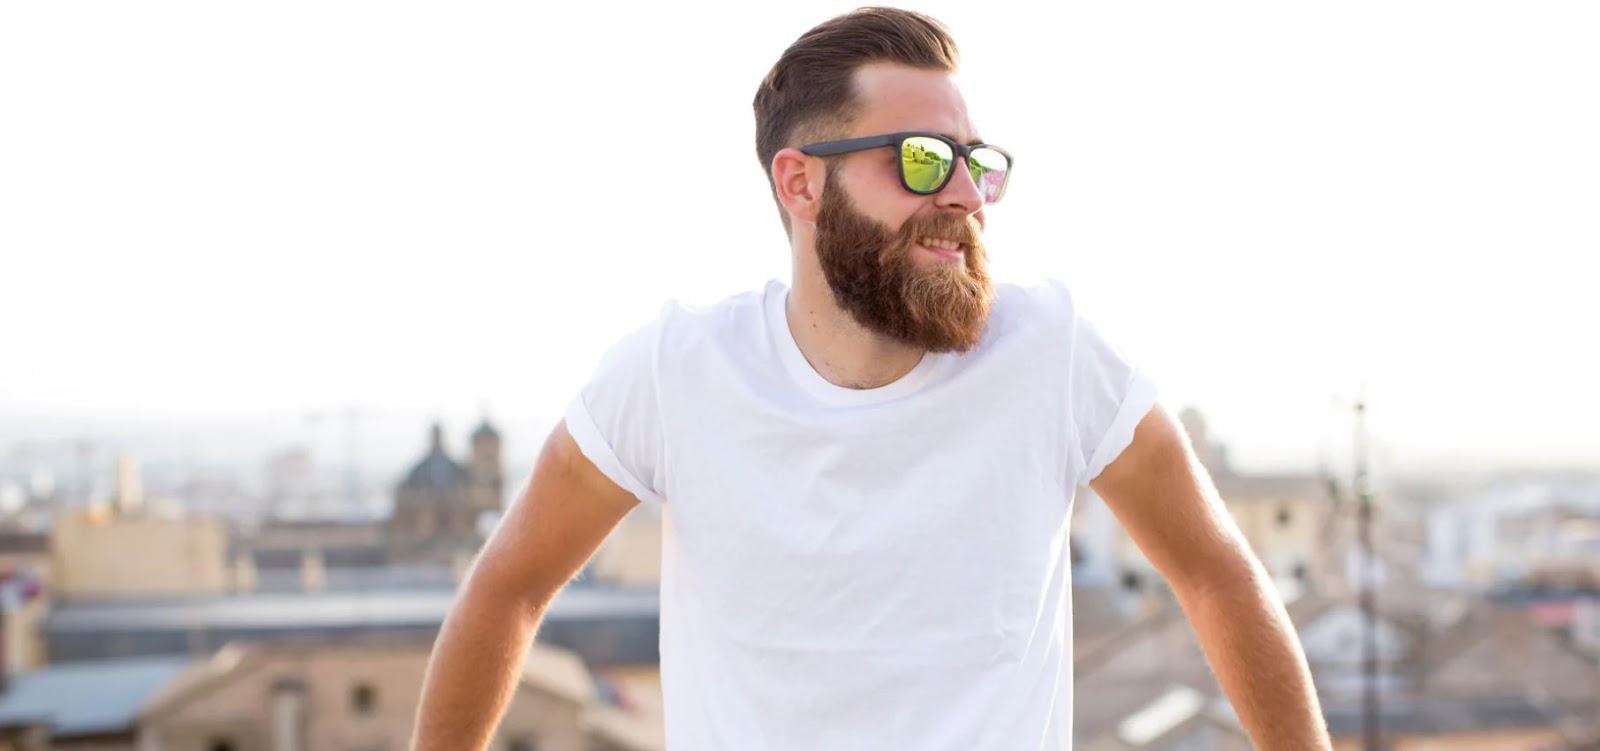 How To Stimulate Beard Growth: Ultimate Guide - 2022